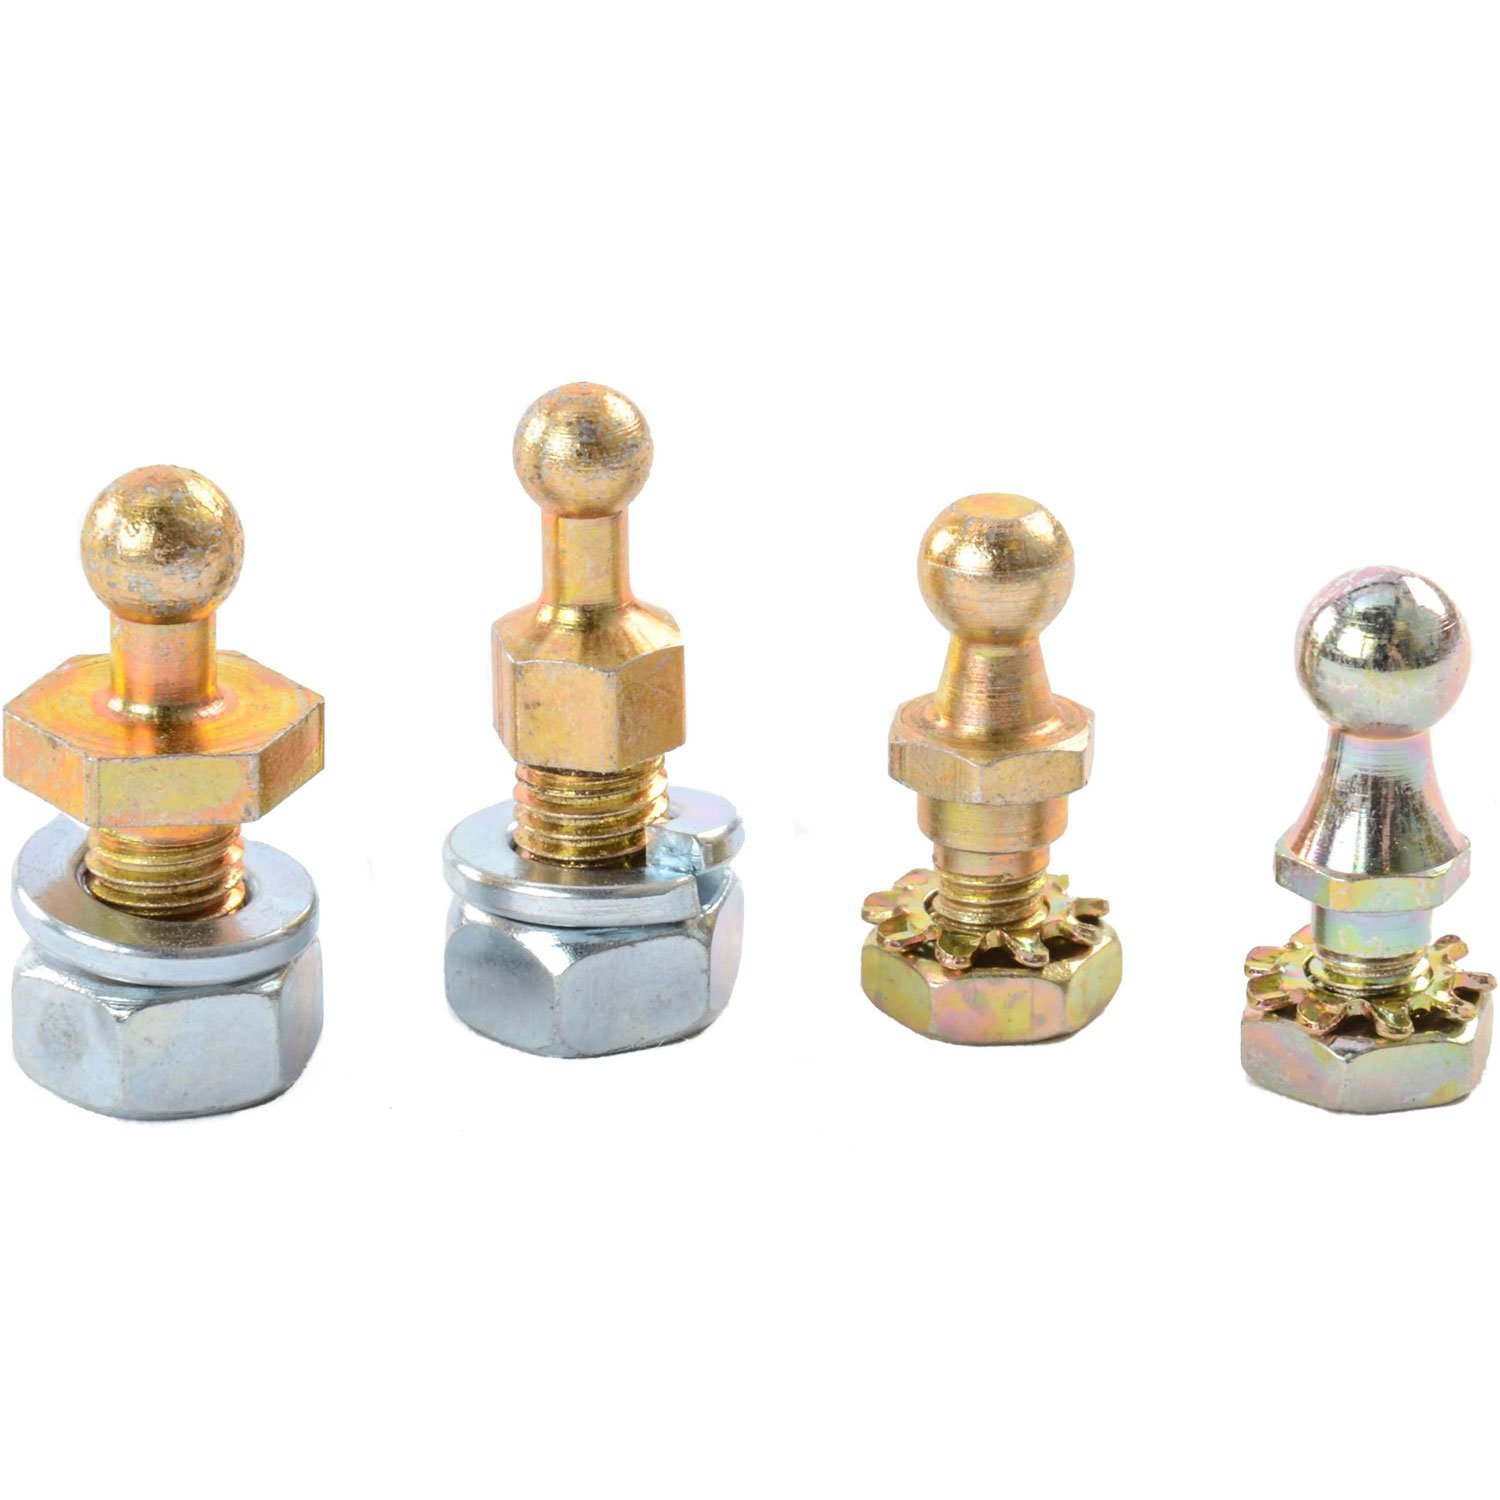 Throttle Linkage Ball Studs Kit Contains The Following: